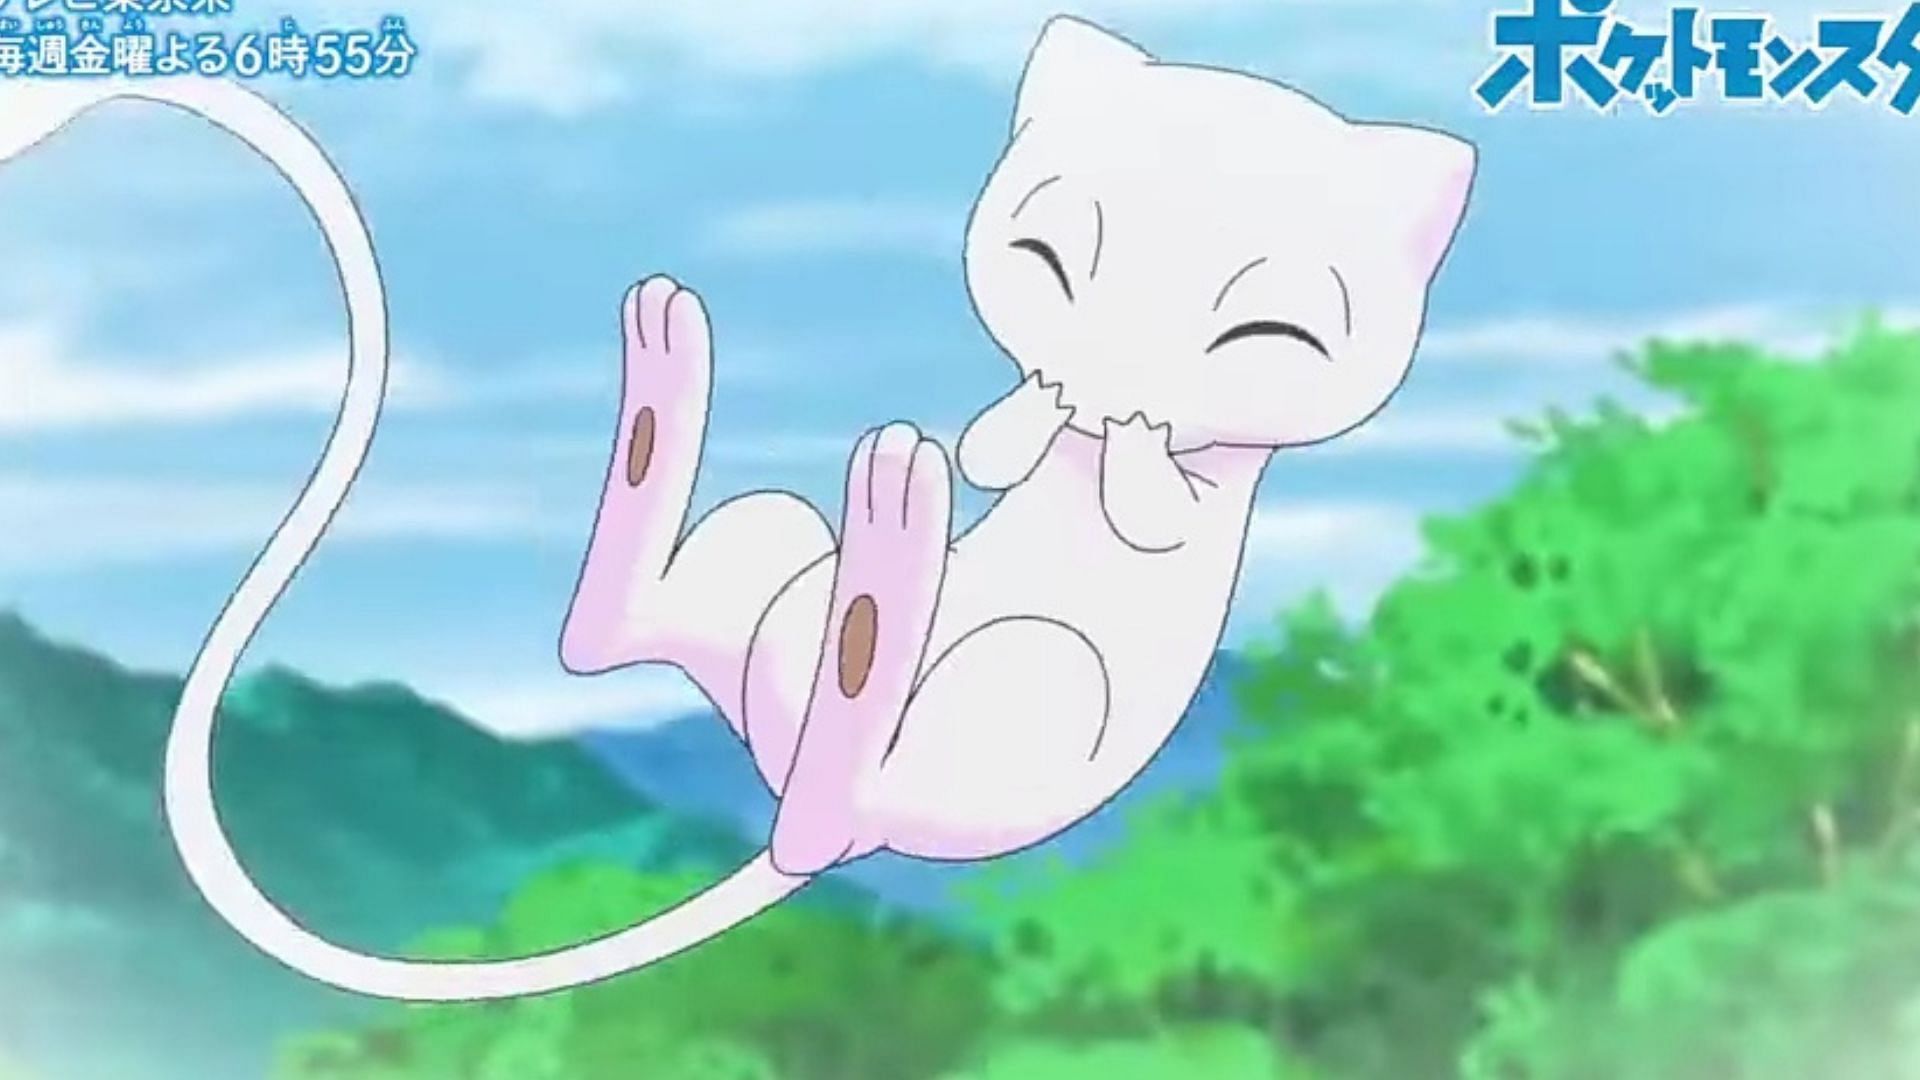 Mew as seen in the anime (Image via OLM)